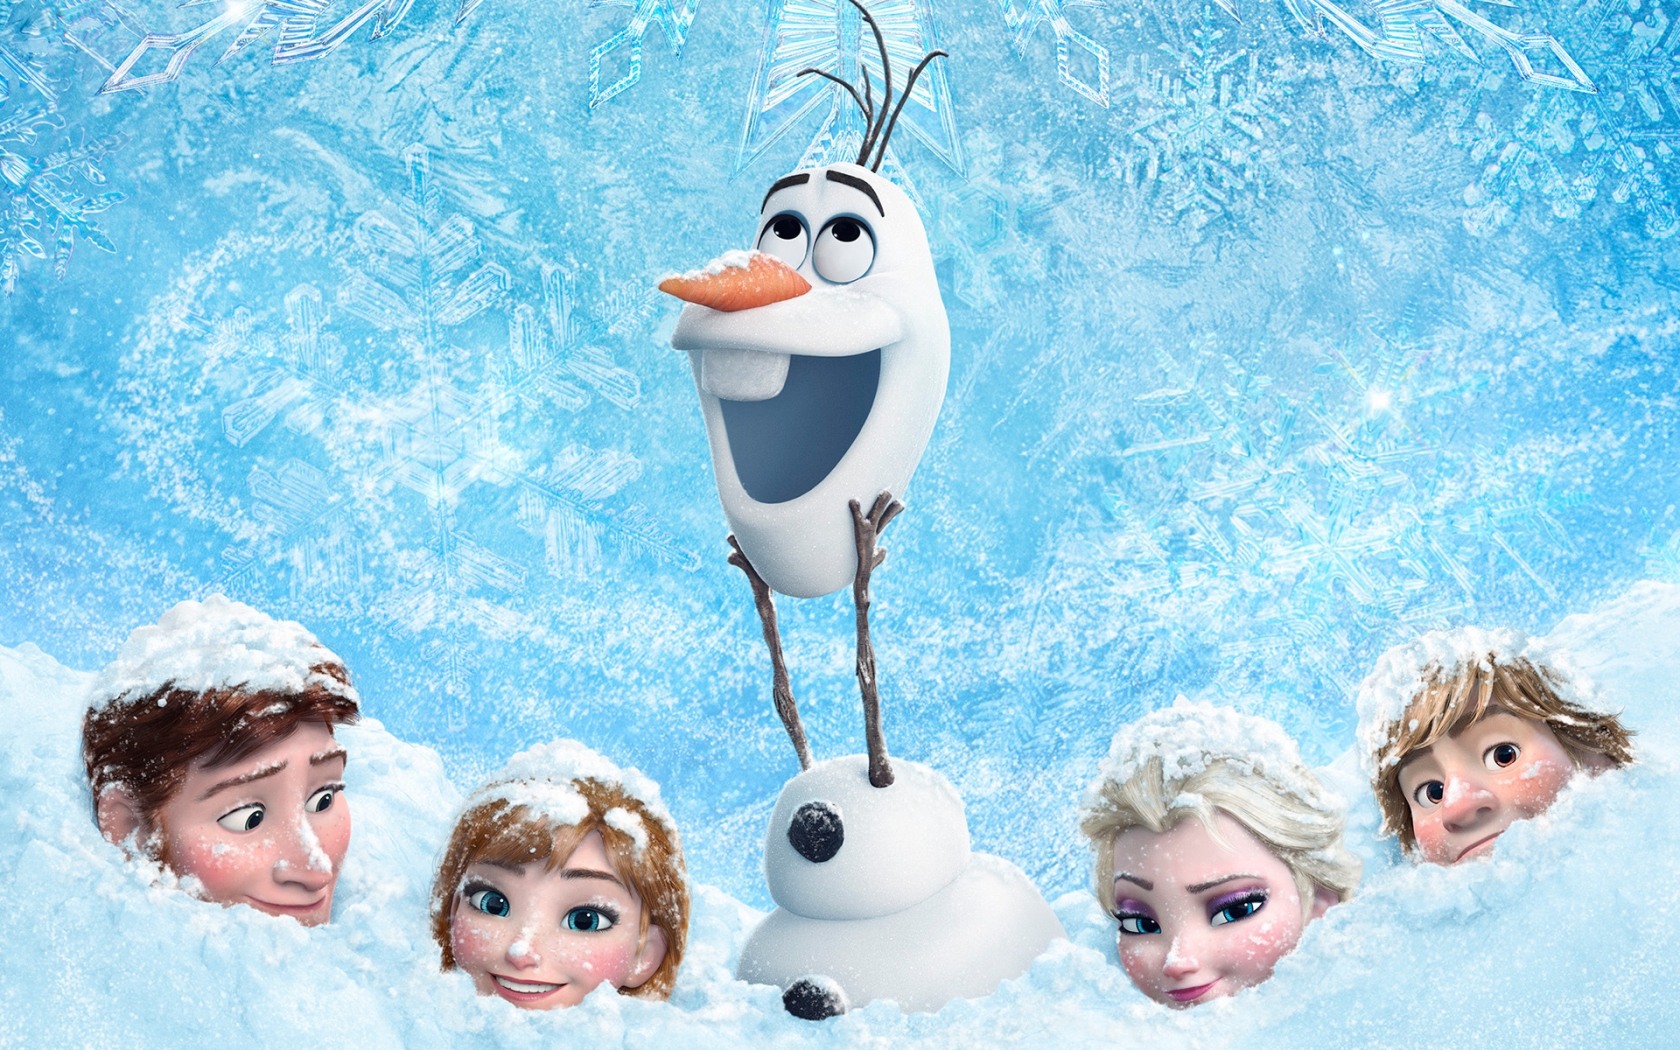 Frozen Animation for 1680 x 1050 widescreen resolution